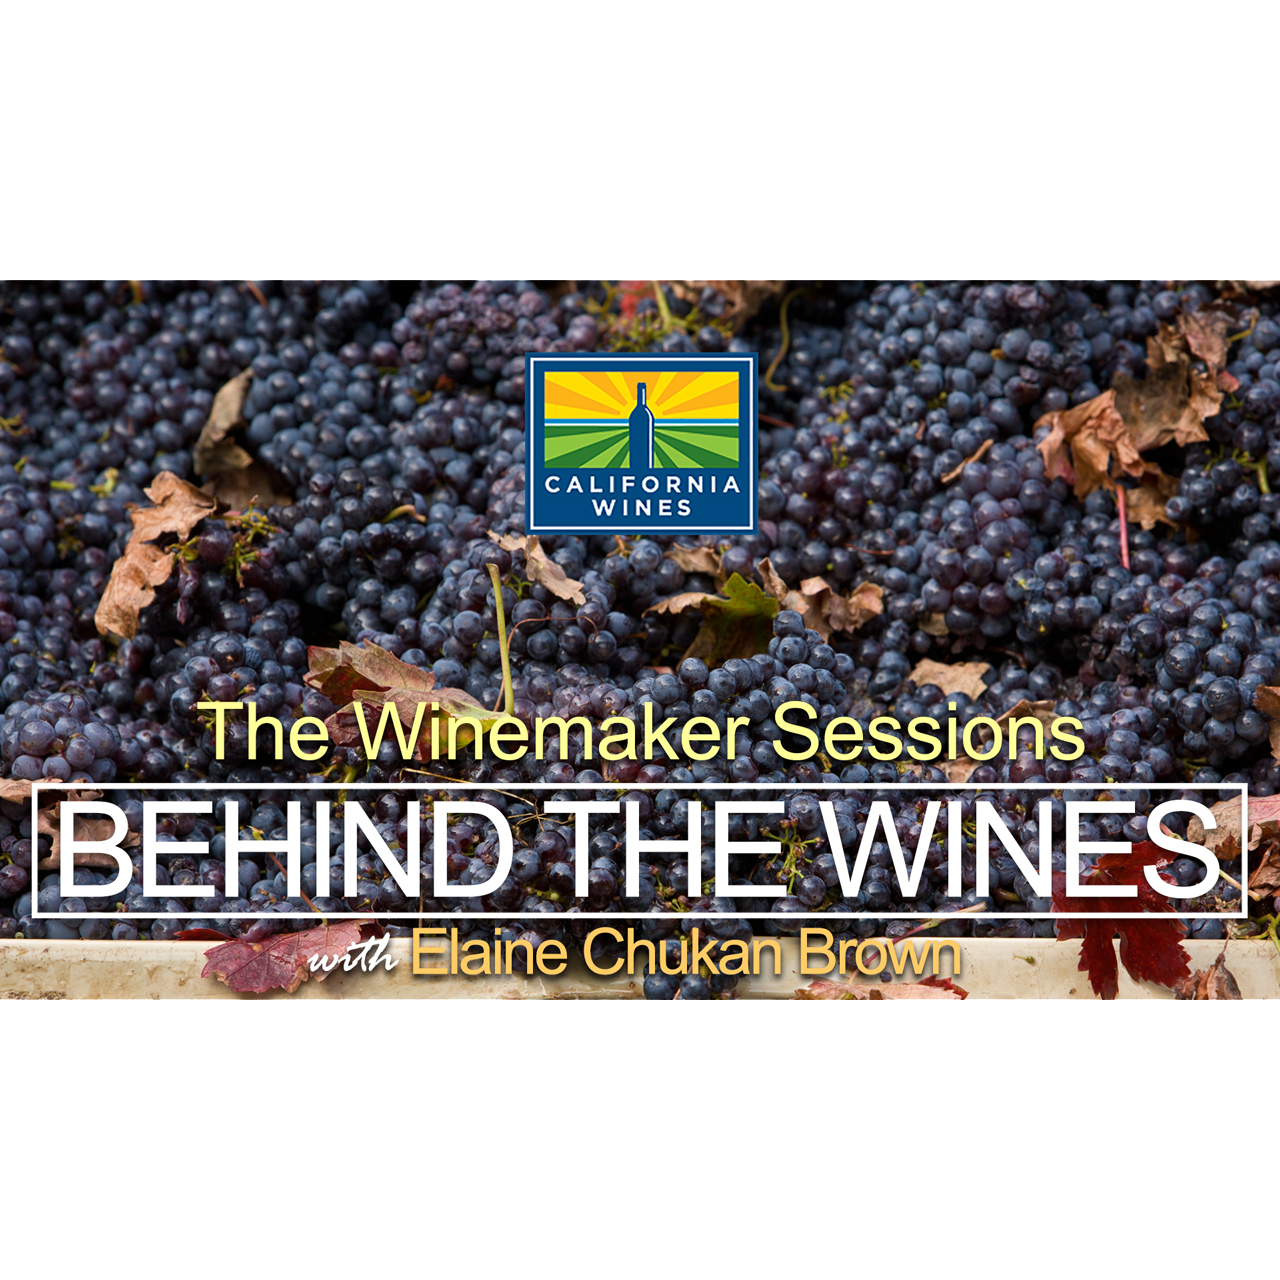 Behind the Wines with Elaine Chukan Brown – “The Winemaker Sessions” (Final Episode)